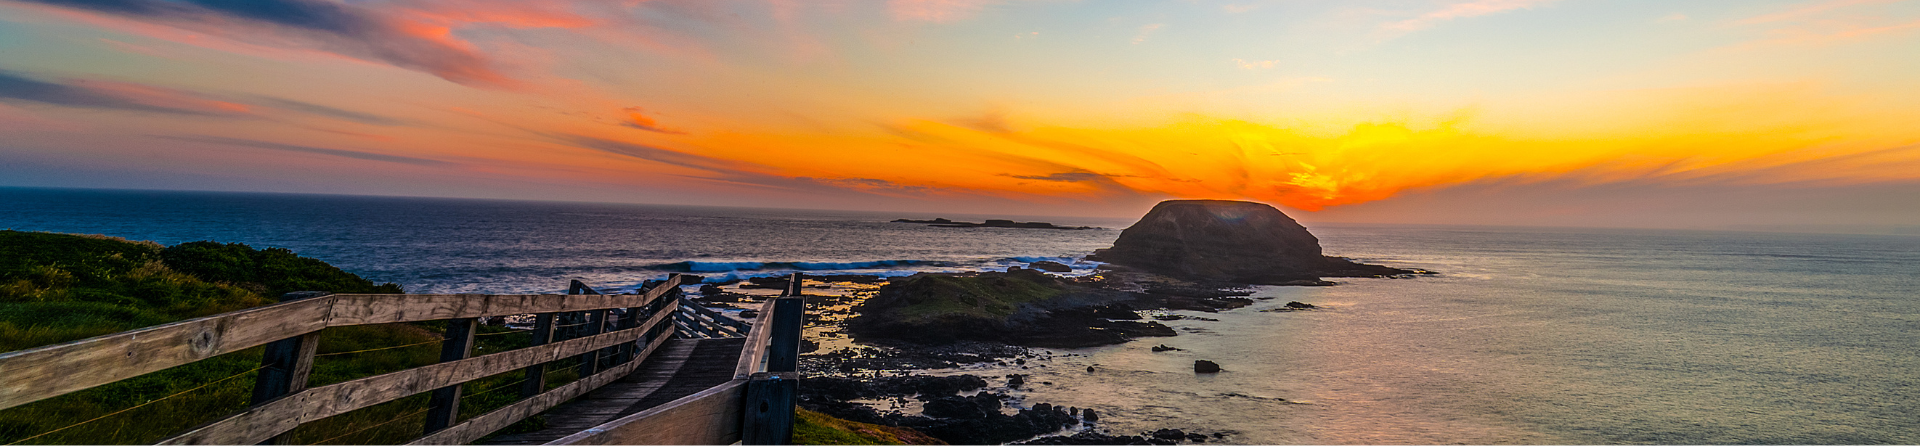 Top 3 places to watch the sunset on Phillip Island